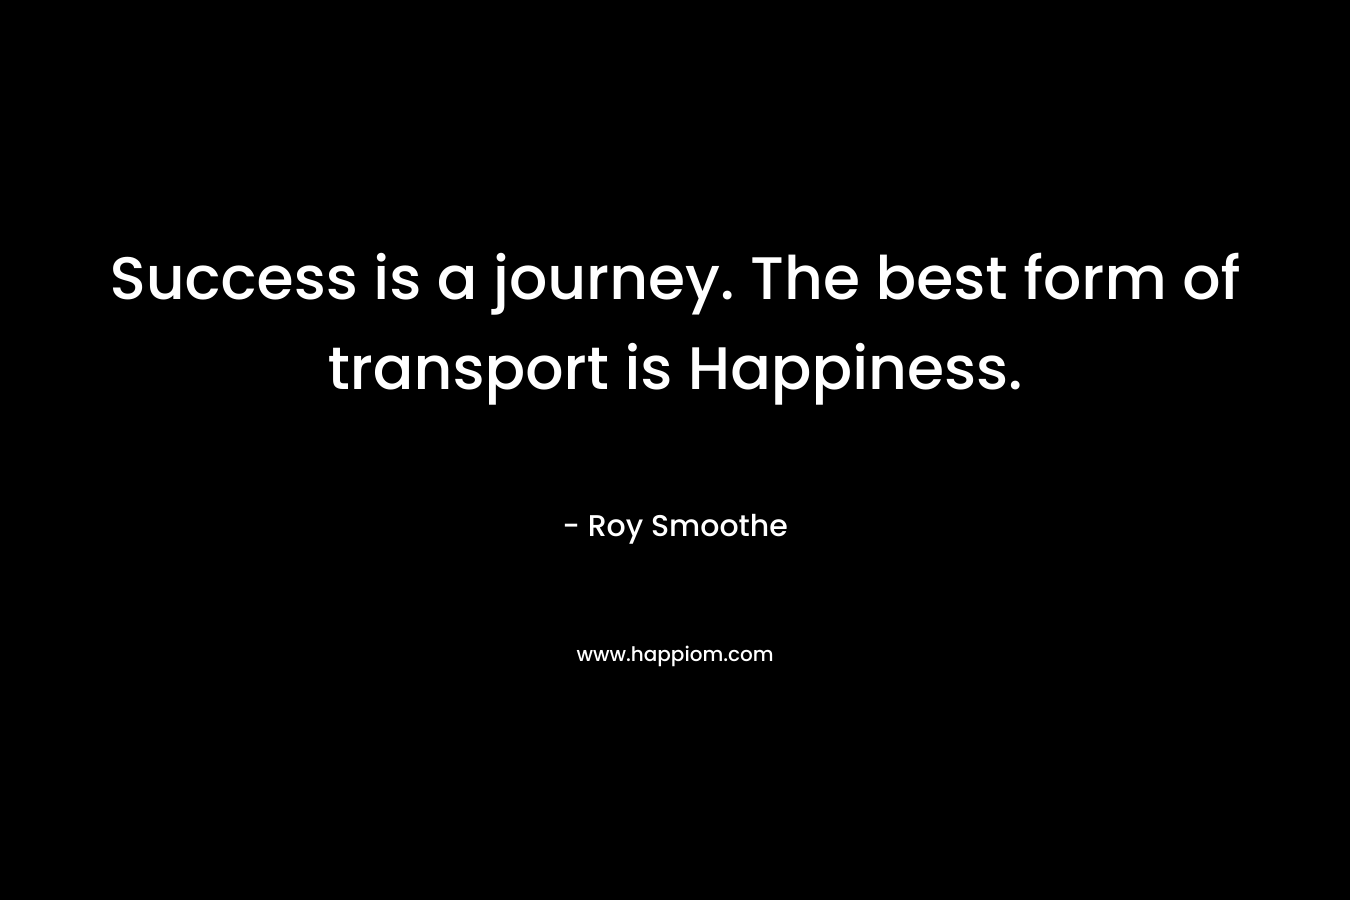 Success is a journey. The best form of transport is Happiness. – Roy Smoothe